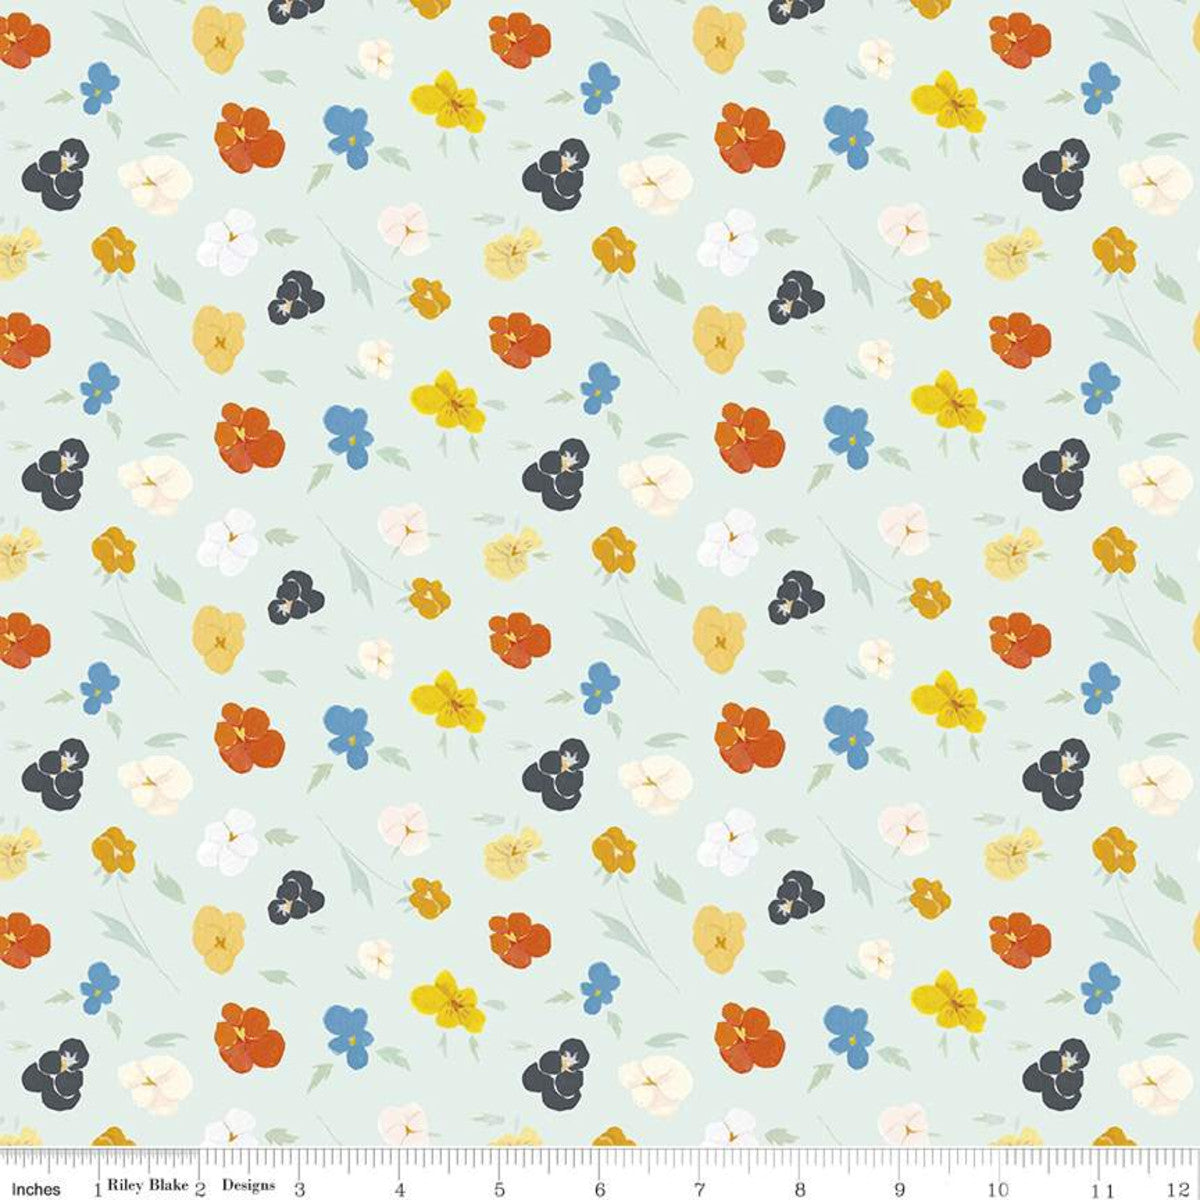 The Littlest Family's Big Day Collection by Emily Winfield Martin for Riley Blake Designs cotton quilt garment fabric material  flowers aqua orange purple blue white pansy pansies johnny jump ups